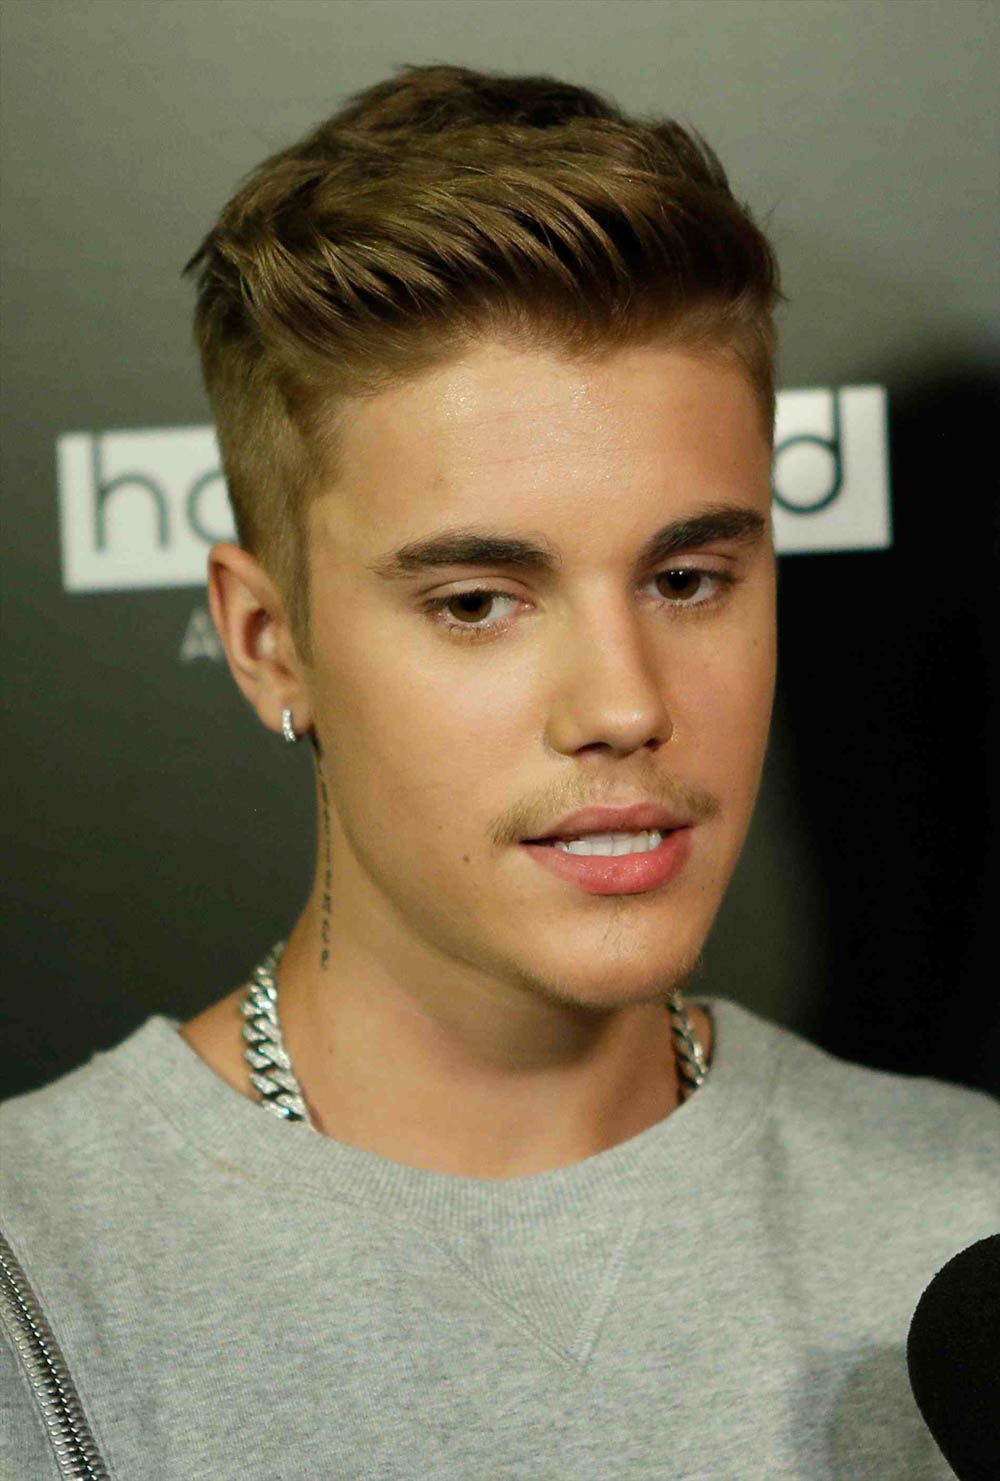 3 Ways to Get the Justin Bieber Haircut - wikiHow-hkpdtq2012.edu.vn